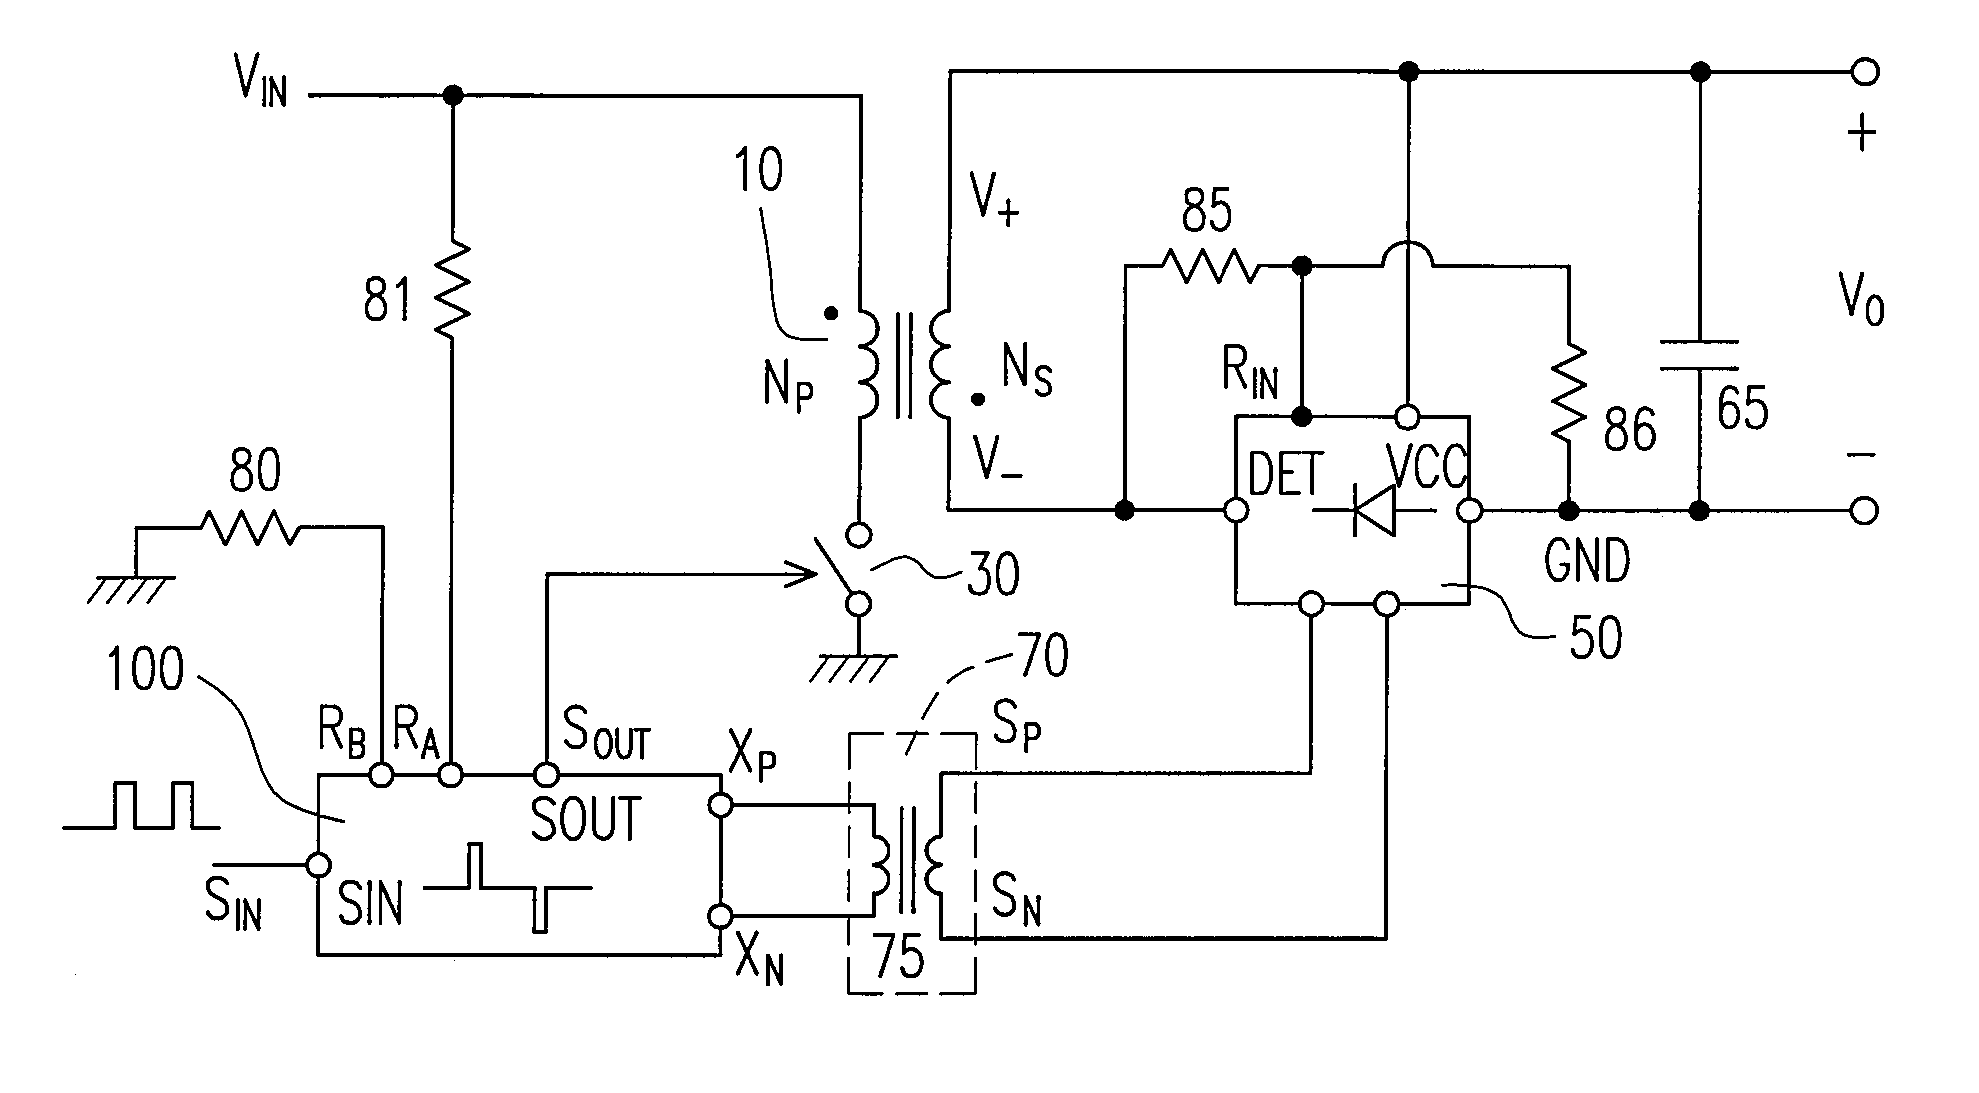 Apparatus to provide synchronous rectifying circuit for flyback power converters